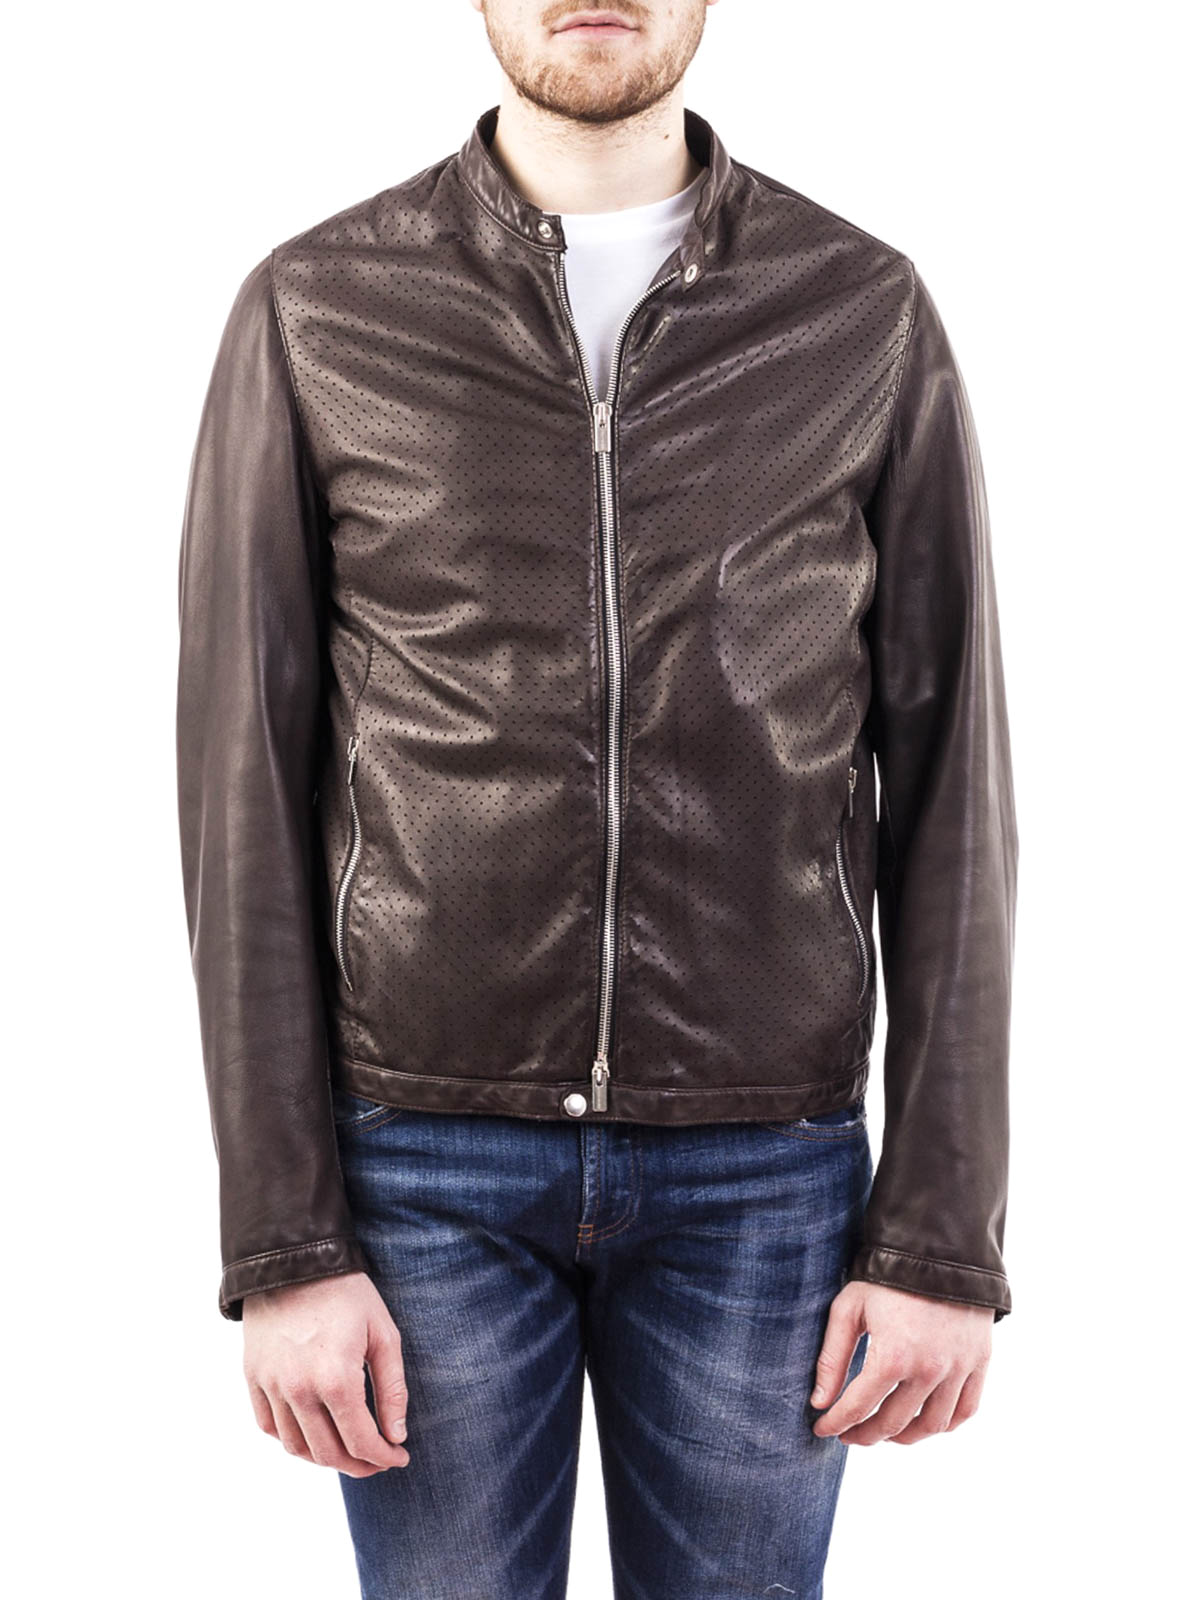 Leather jacket Tagliatore - Perforated front leather jacket